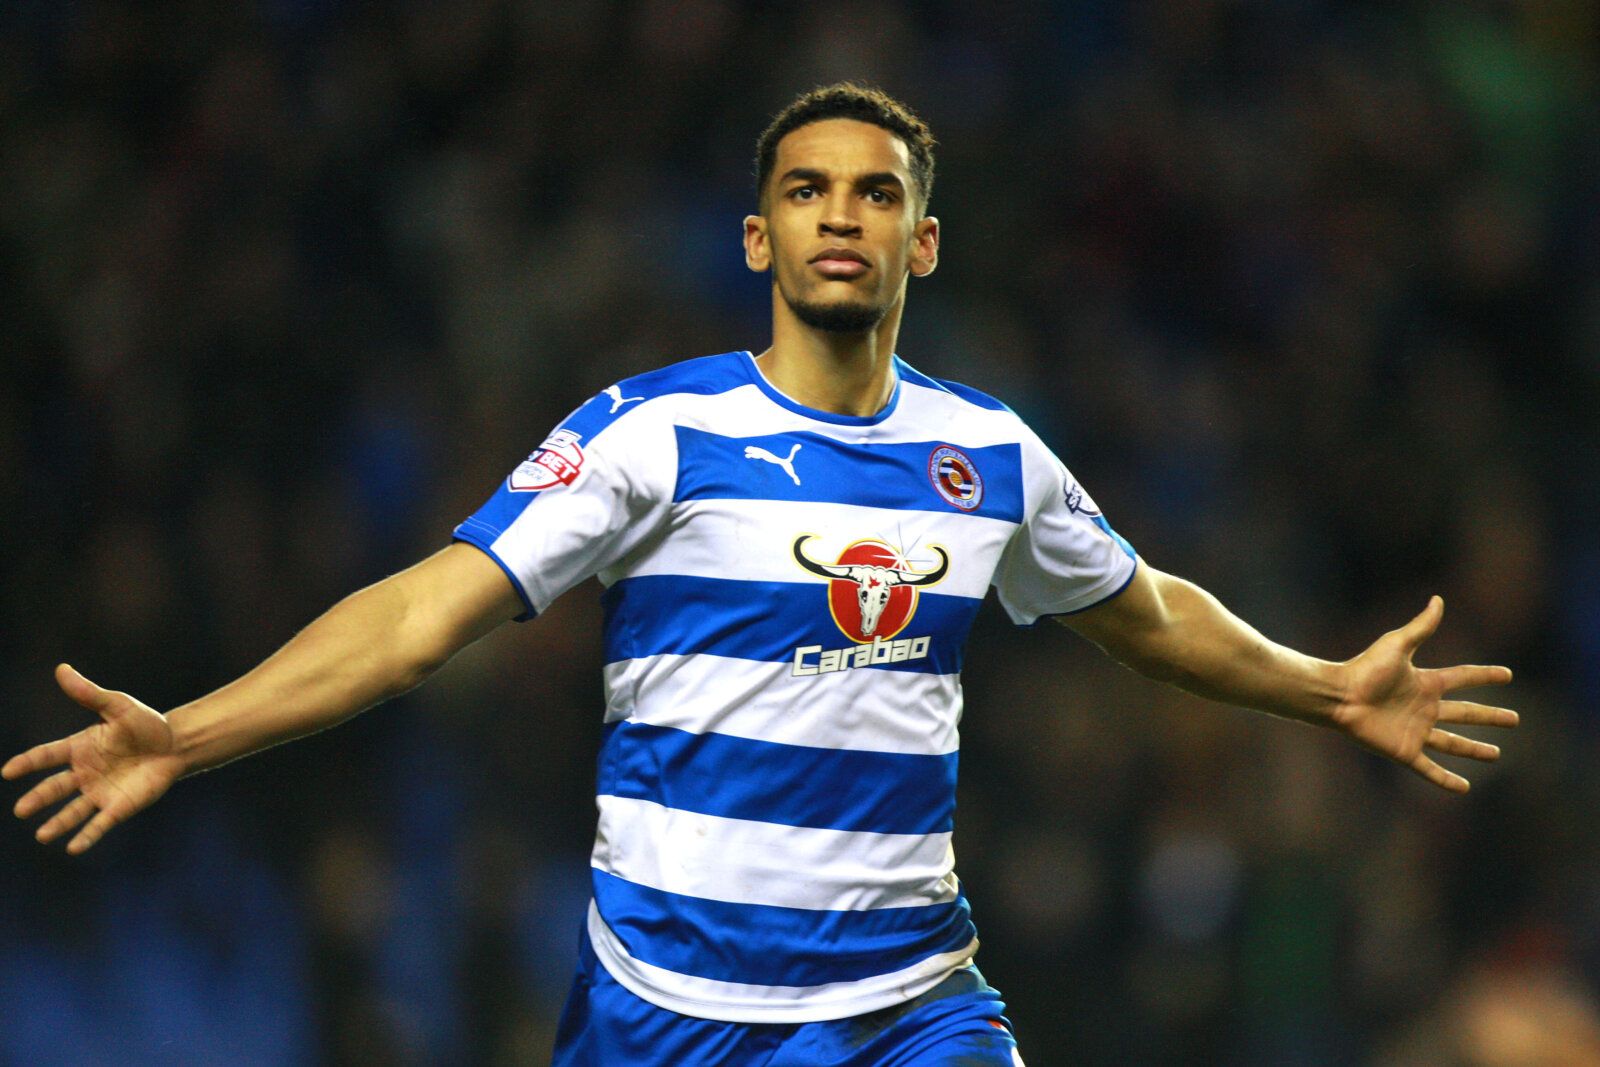 Football Soccer - Reading v Bristol City - Sky Bet Football League Championship - The Madejski Stadium - 2/1/16 
Nick Blackman celebrates scoring the first goal for Reading 
Mandatory Credit: Action Images / David Field 
Livepic 
EDITORIAL USE ONLY. No use with unauthorized audio, video, data, fixture lists, club/league logos or 